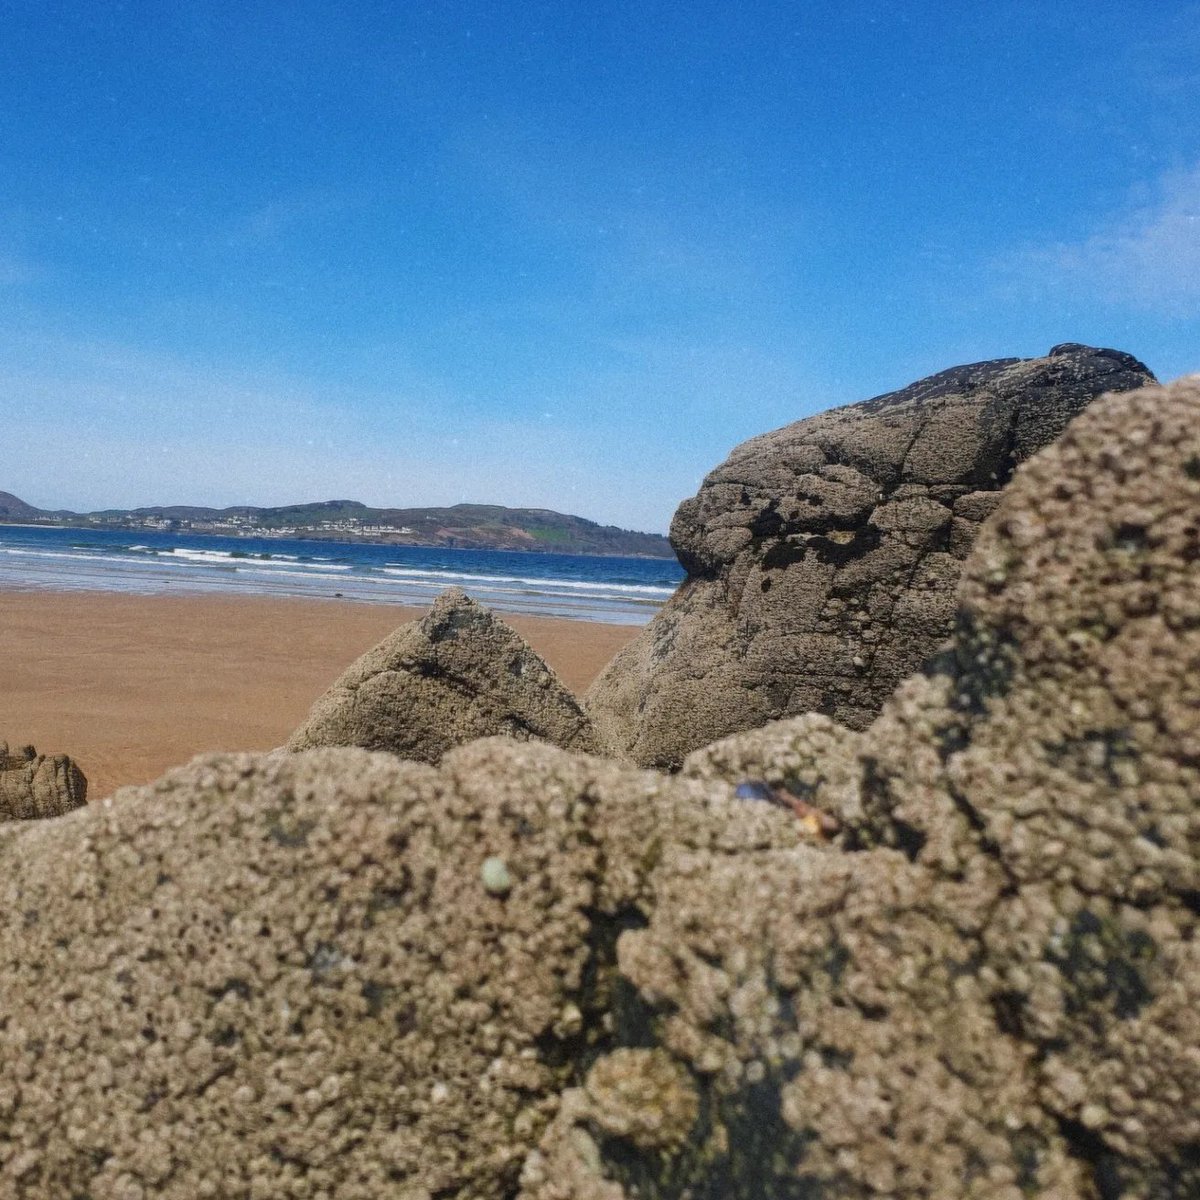 No filters needed. A Gorgeous April day 🤩🤩☀️☀️ looking forward to more #photohour #donegal #Ireland #beaches #WildAtlanticWay #photography #PhotographyIsArt